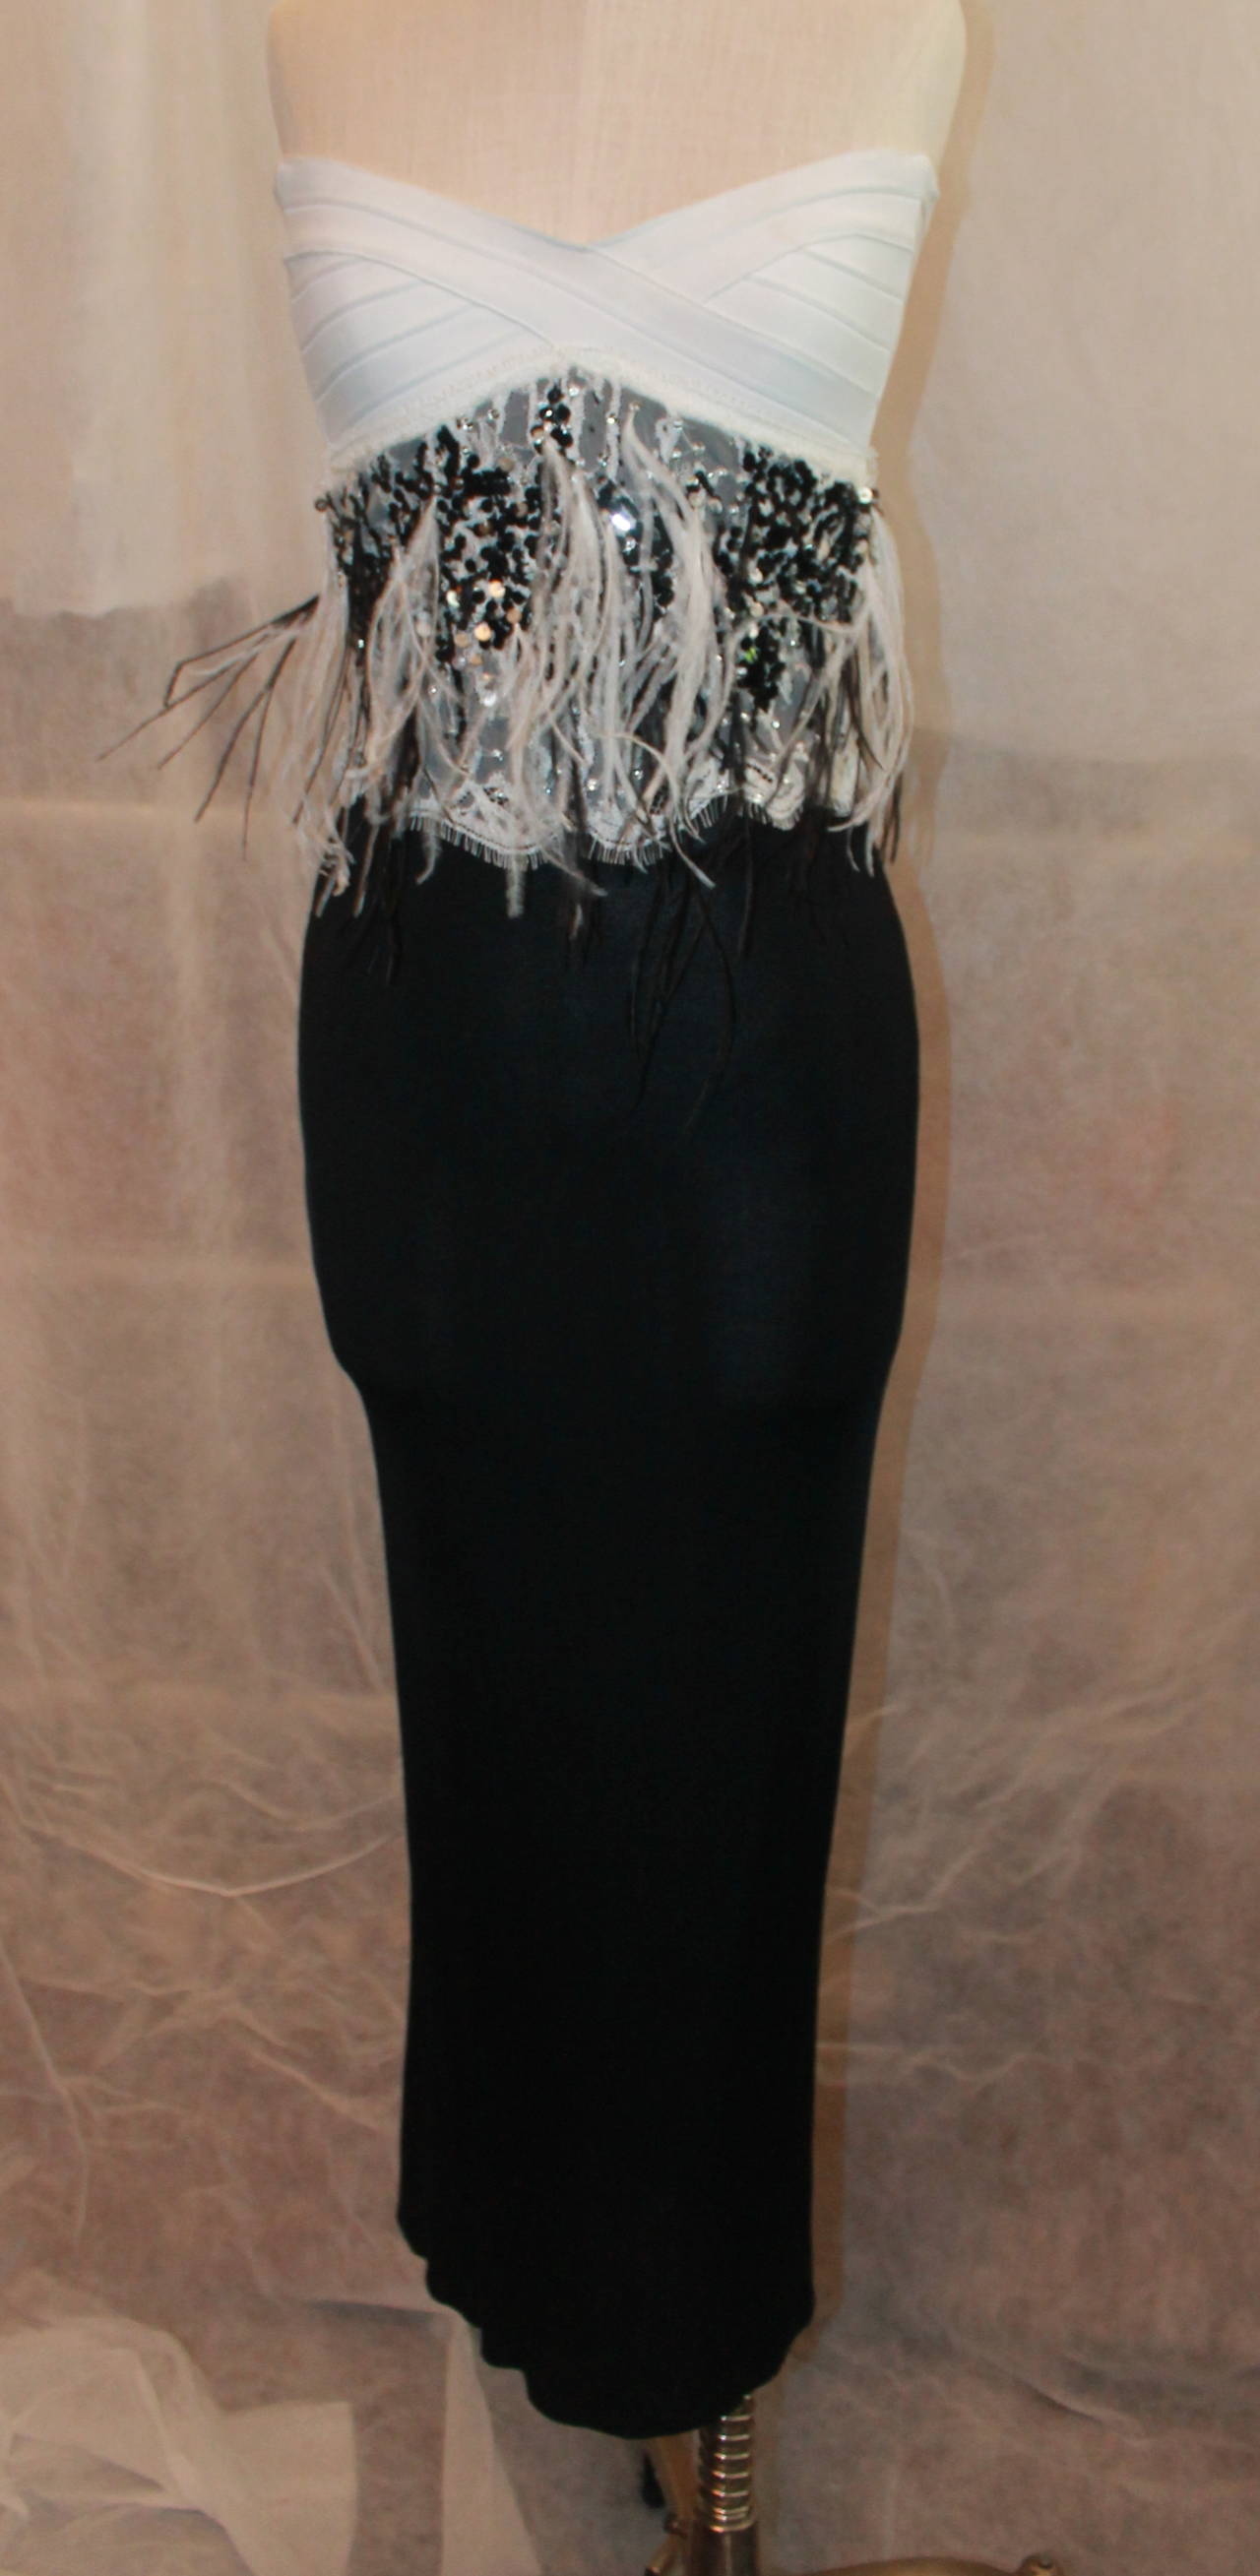 Herve Leger Strapless Black & White Gown with Sequins & Feathers - 2. This gown is in good condition with minor wear. The white top of the gown zips up and then the black portion of the gown zips on top of it. The sequin & lace detail is in the